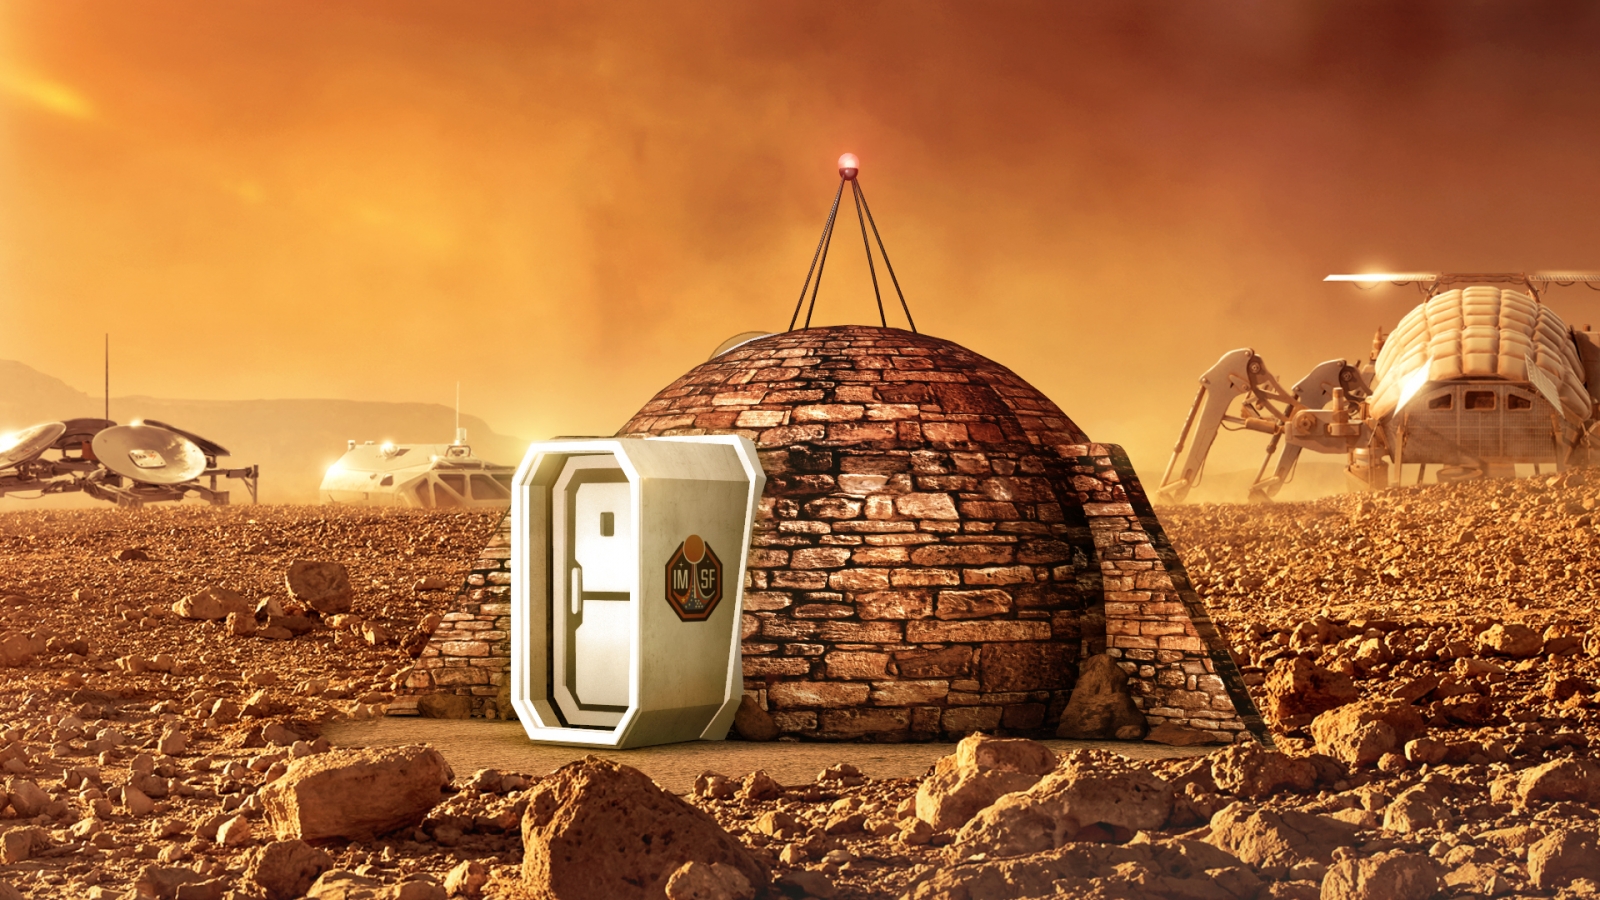 Life on Mars: First house on the Red Planet built at Royal